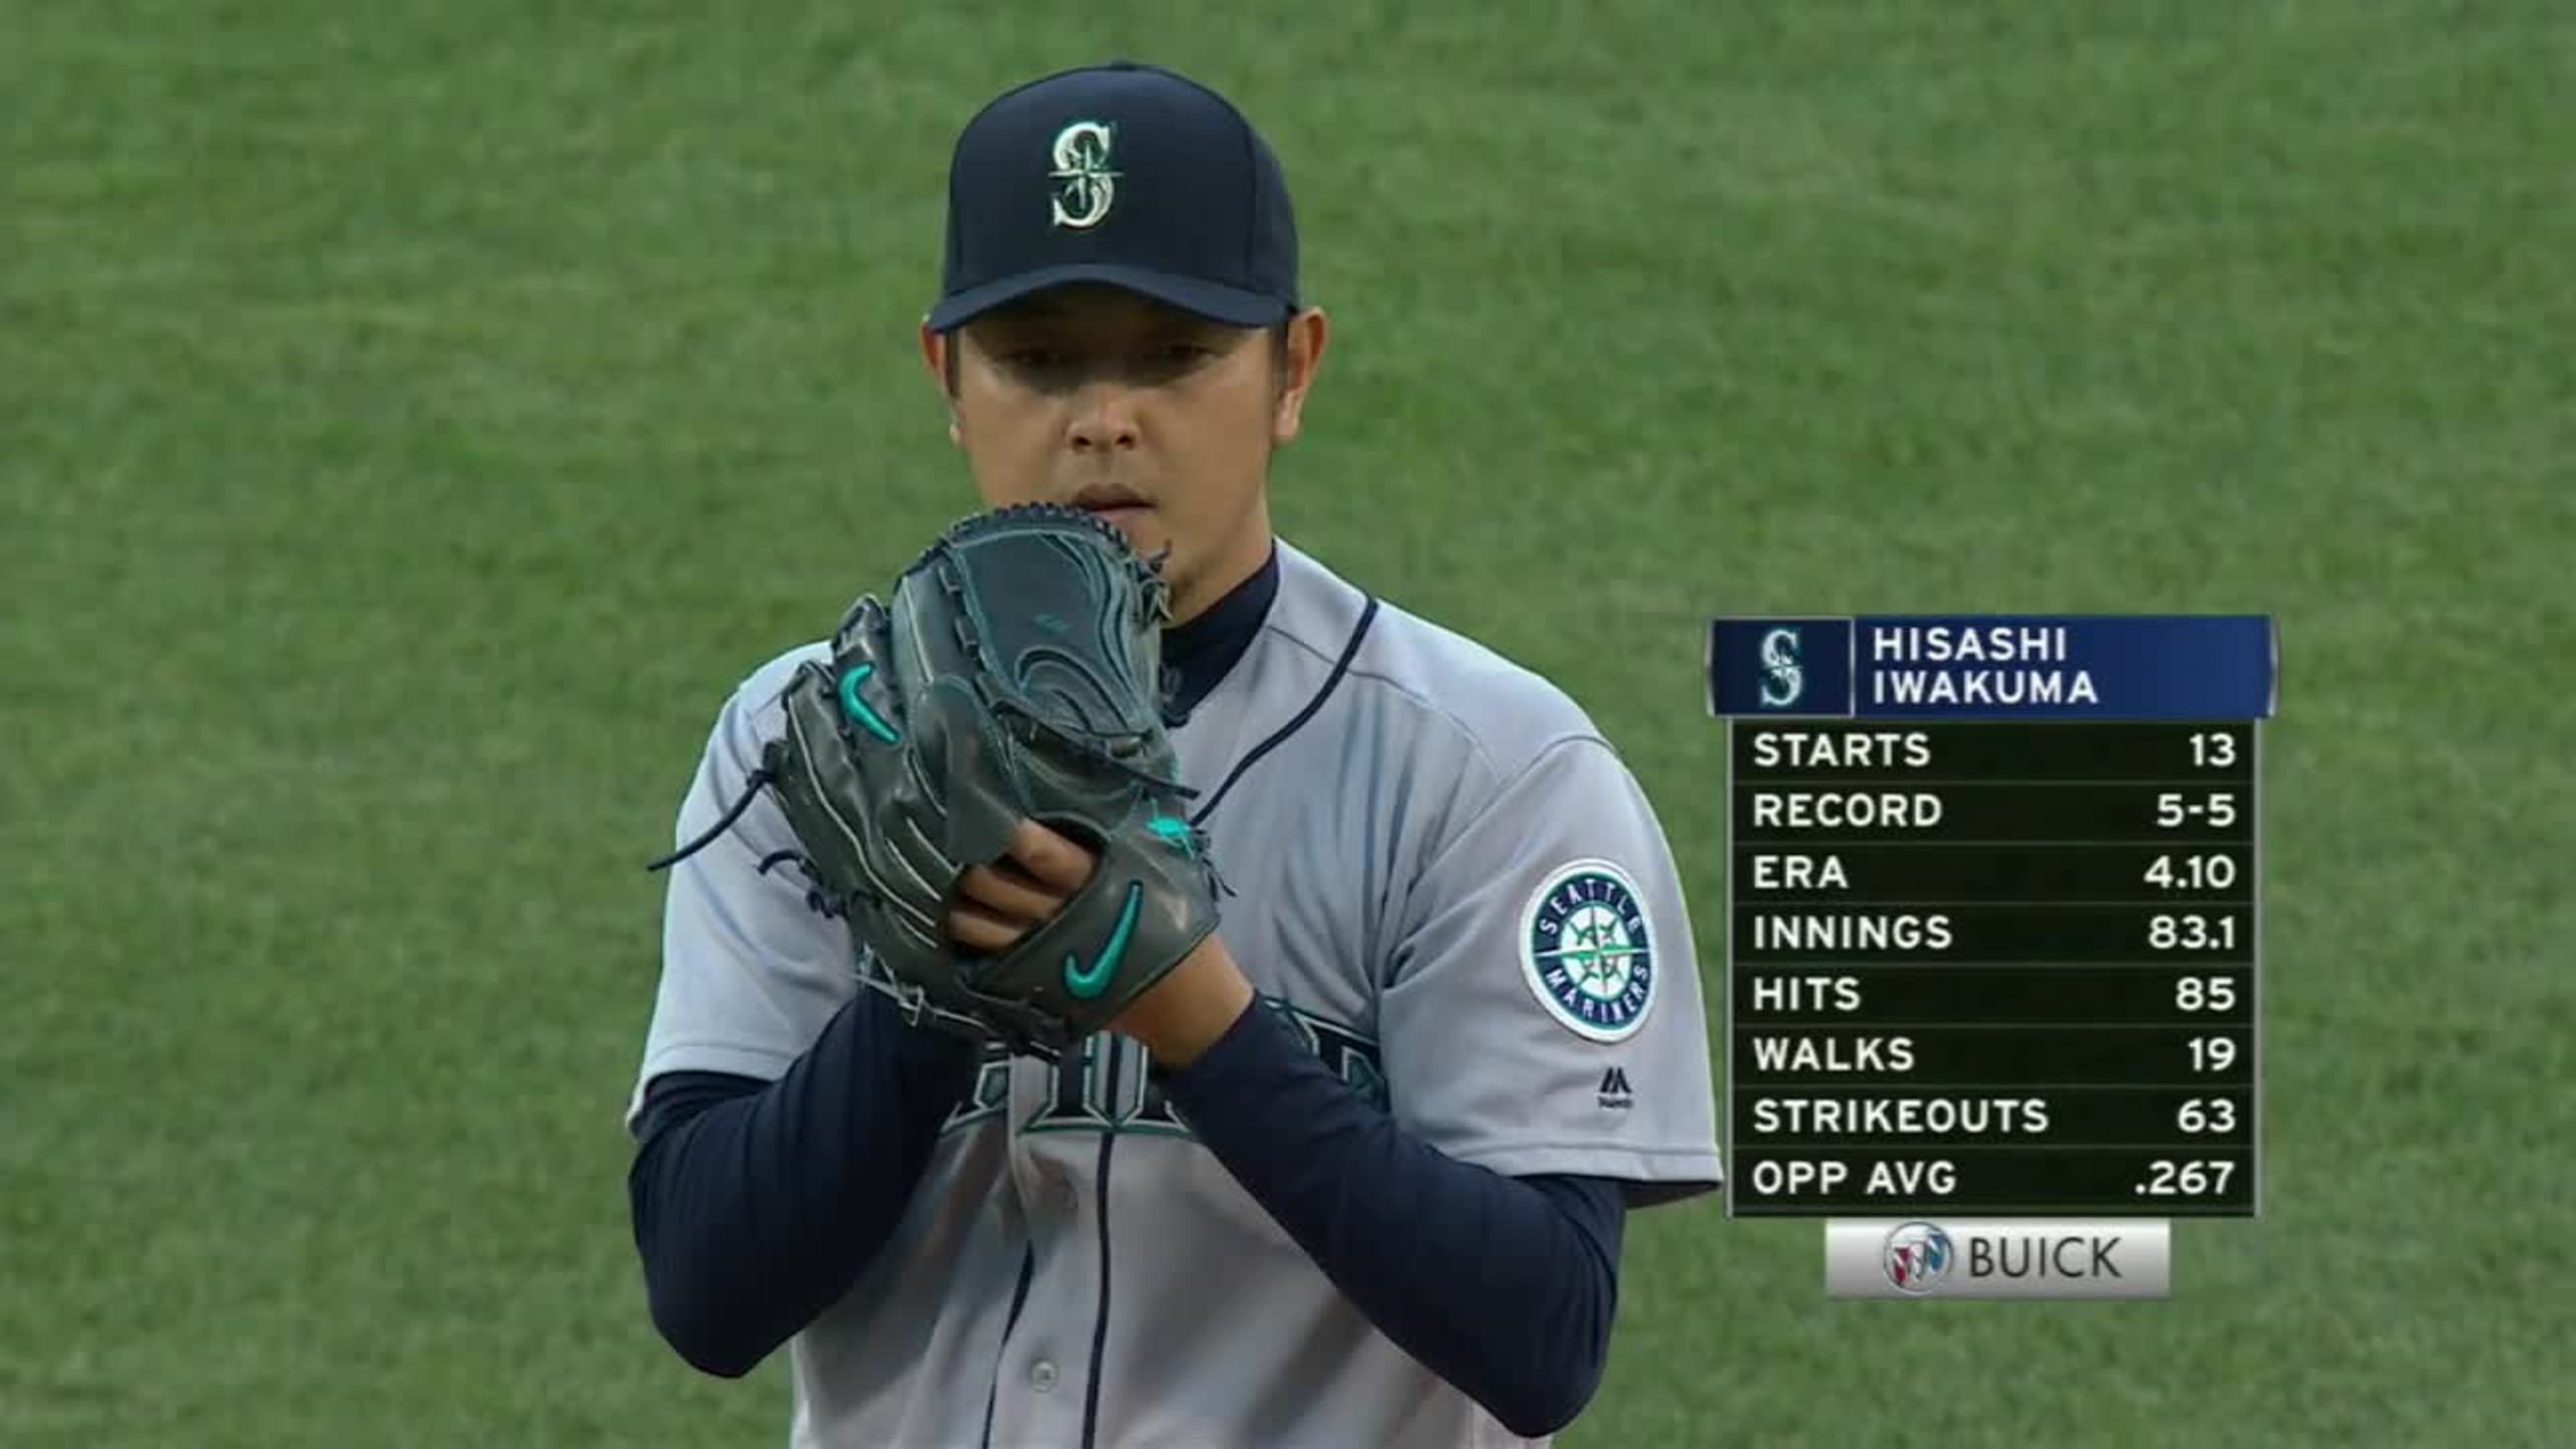 Hisashi Iwakuma hopes to be healthy and helpful to the Mariners in